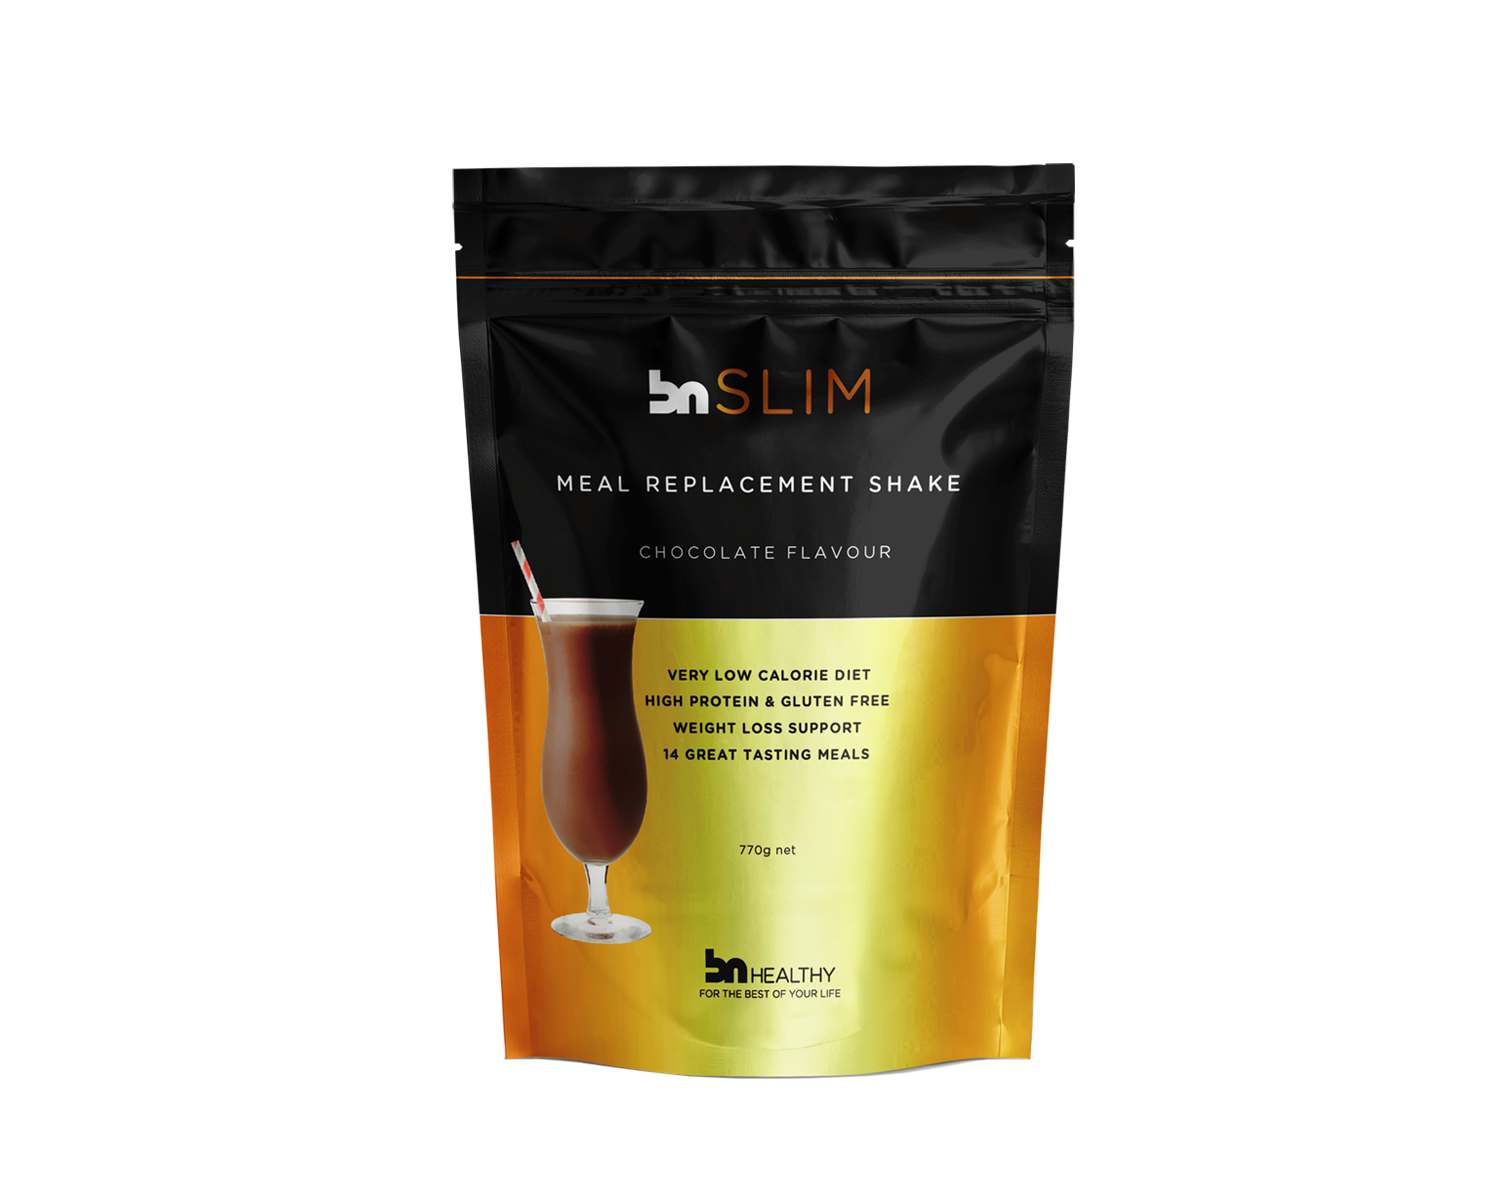 BN Slim - Meal Replacement Shake chocolate flavour